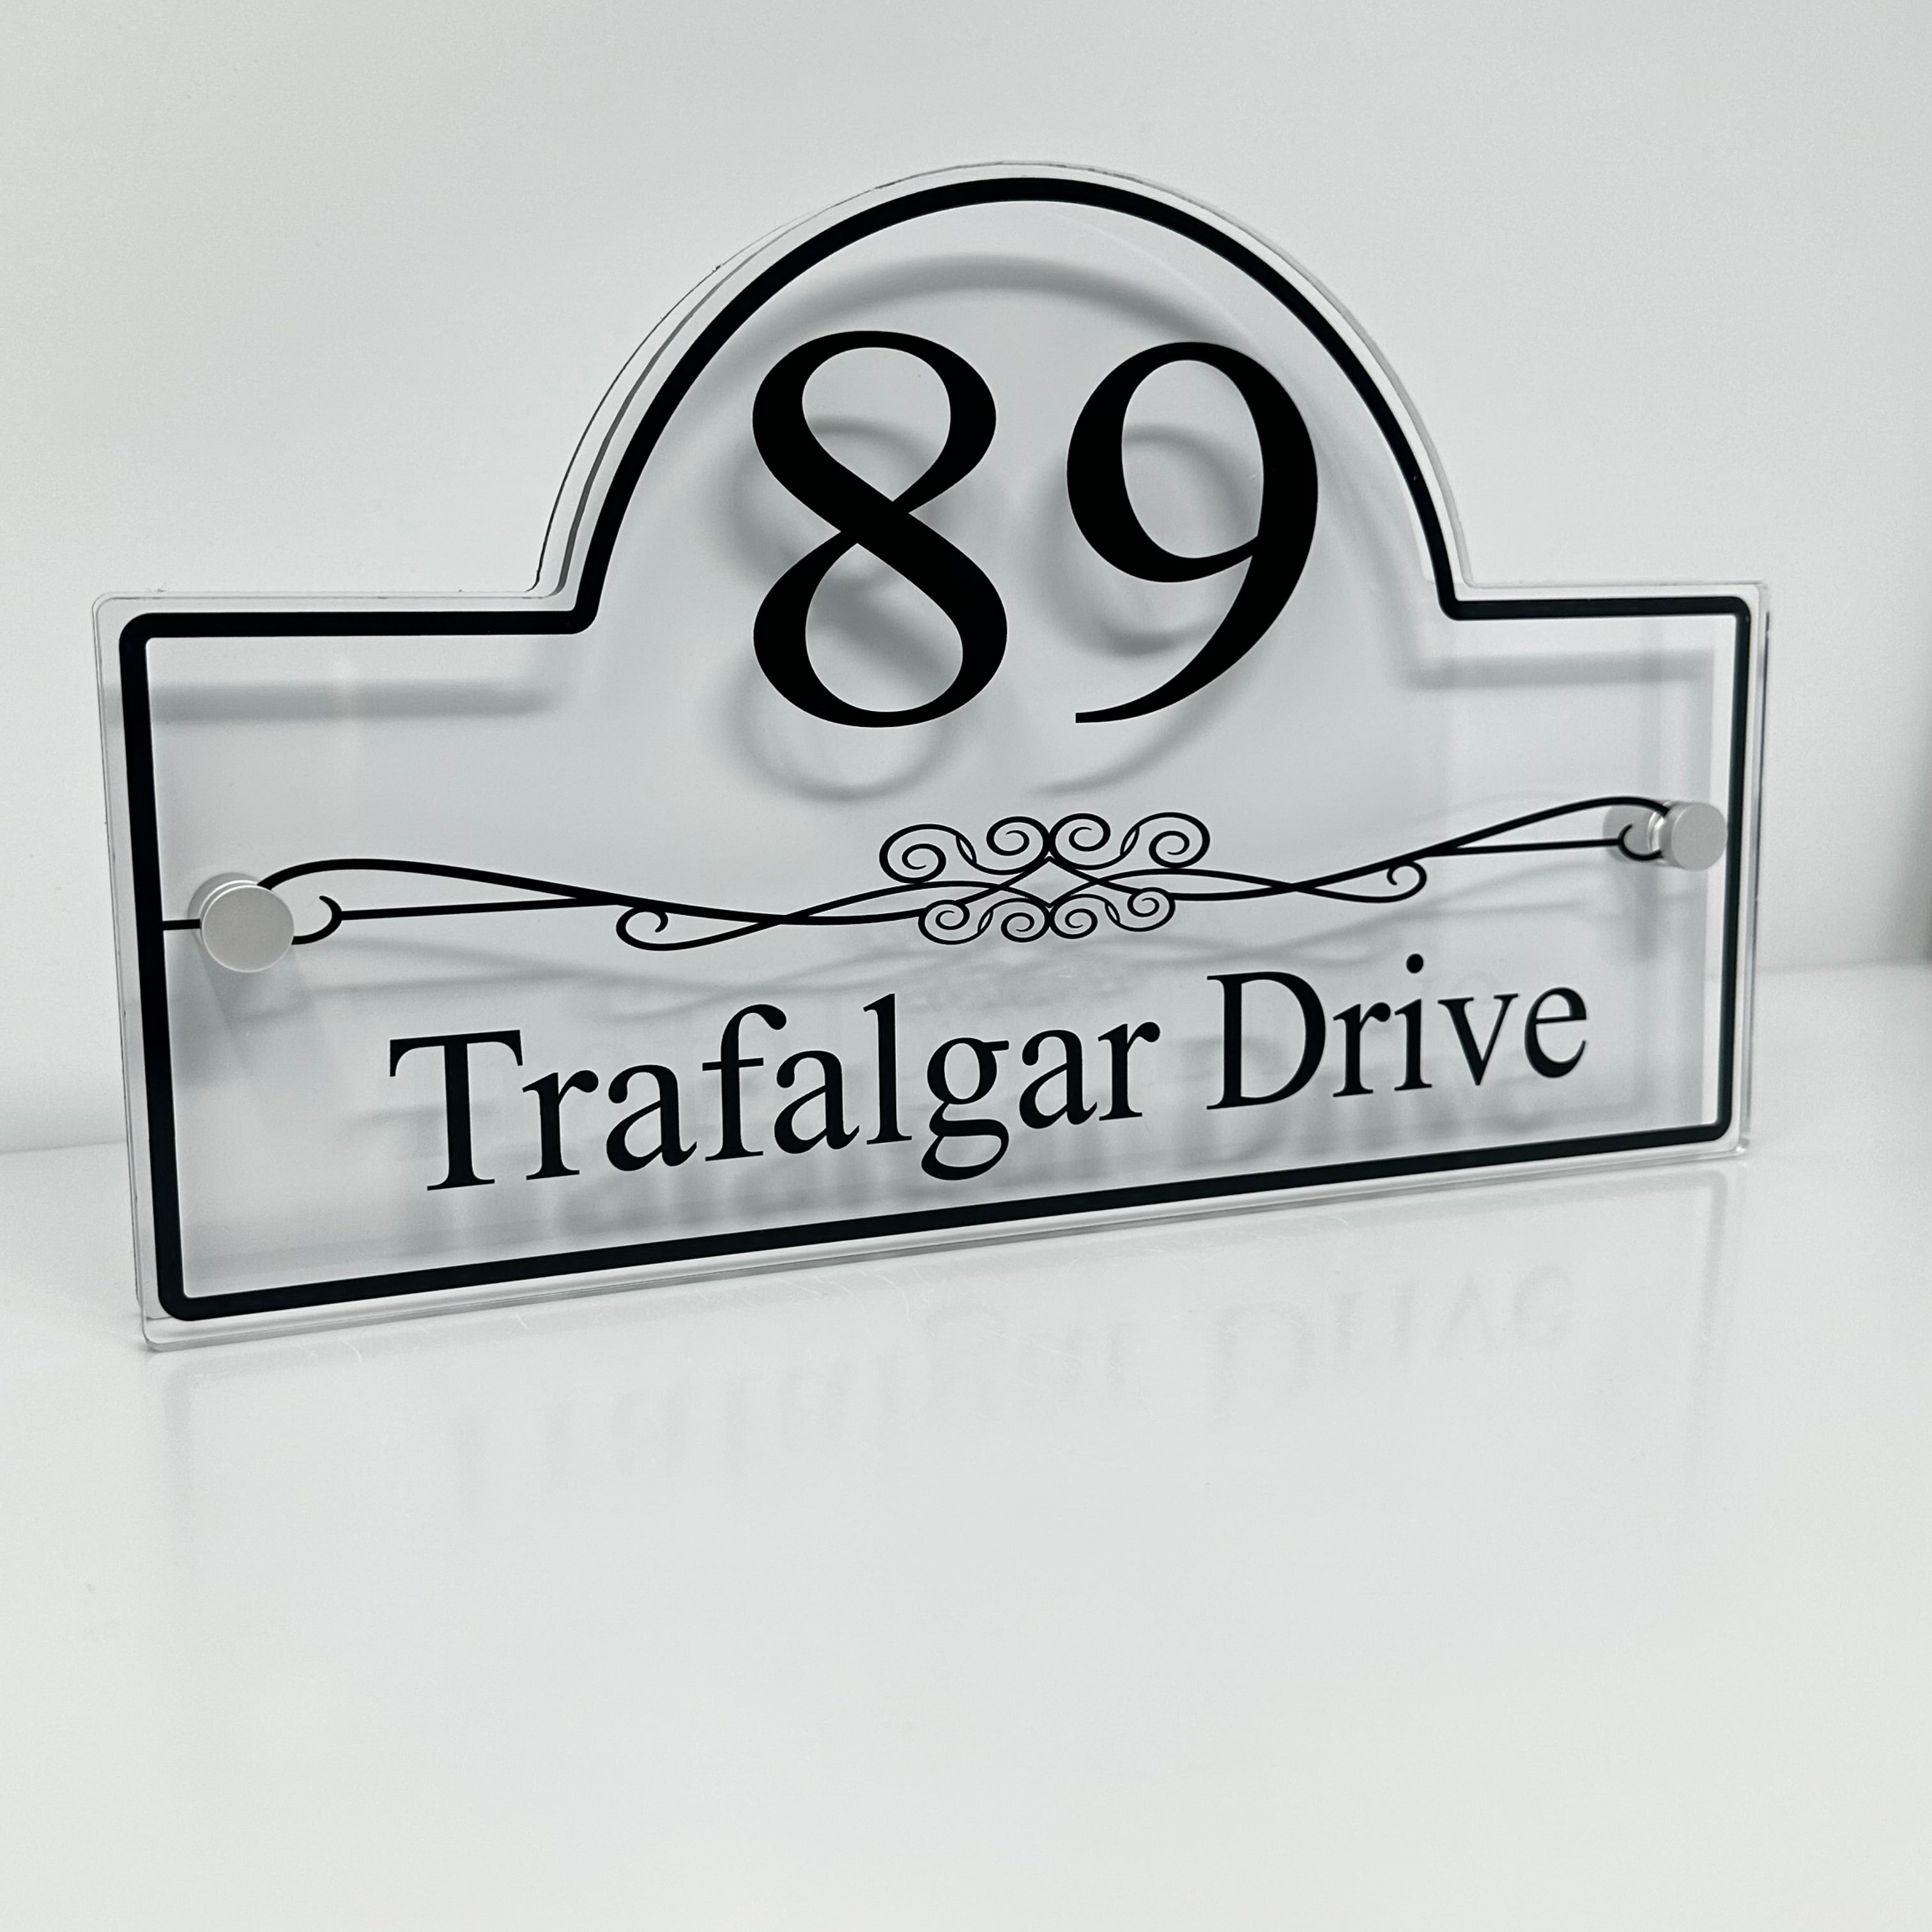 The Trafalgar Modern House Sign with Perspex Acrylic Front, White Rear Panel and Satin Silver Stand Off Fixings ( Size - 30cm x 18cm )